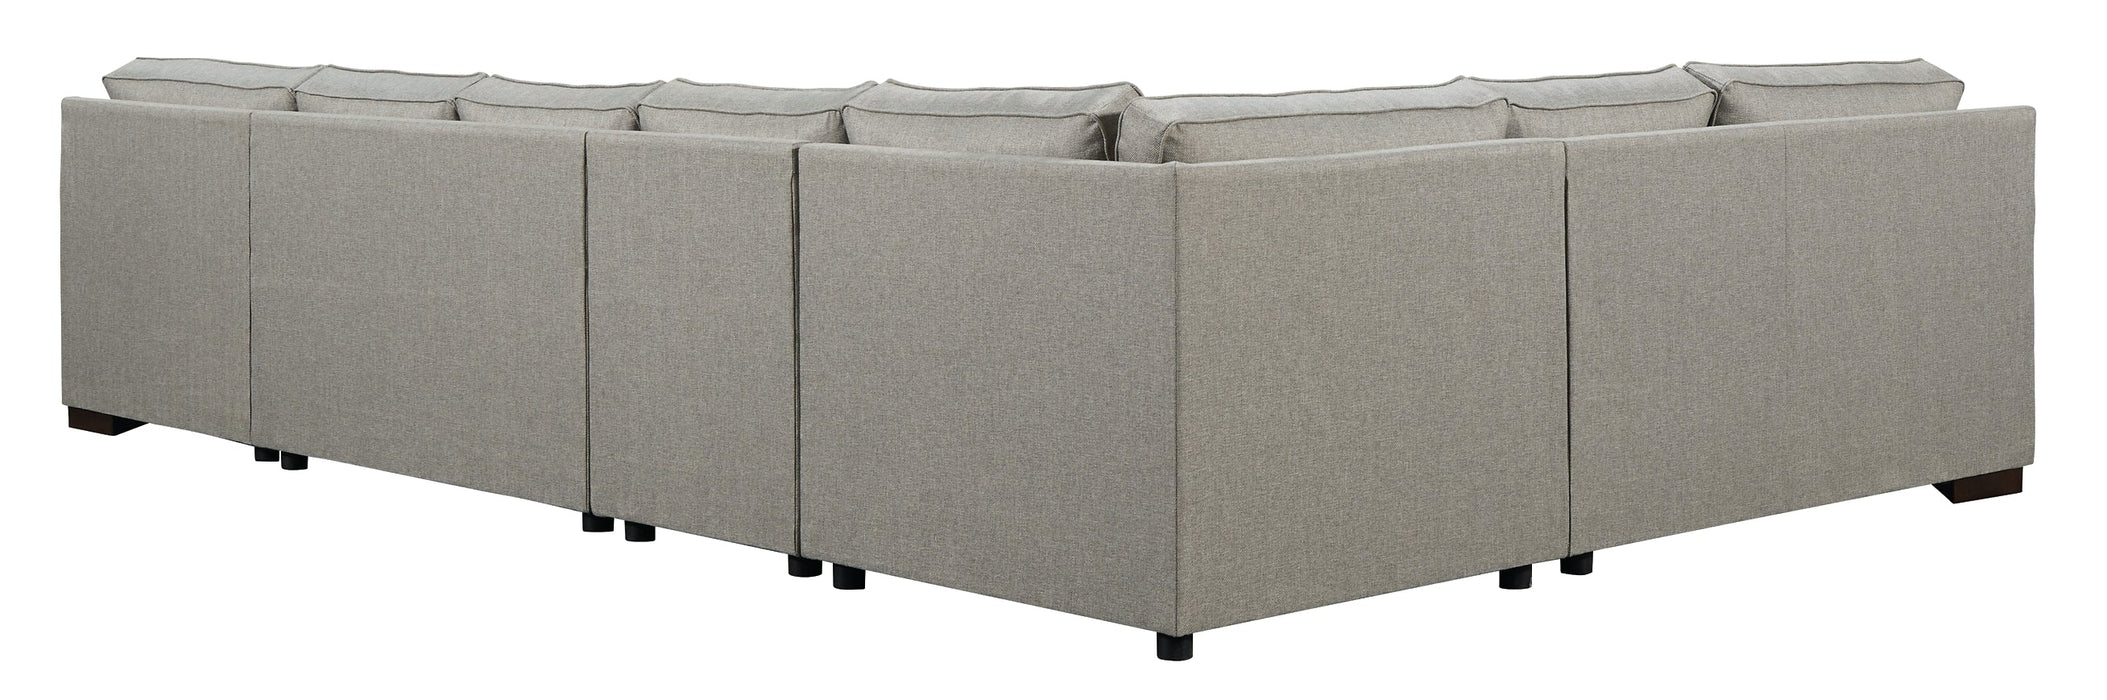 Marsing Nuvella 5-Piece Sectional with Ottoman